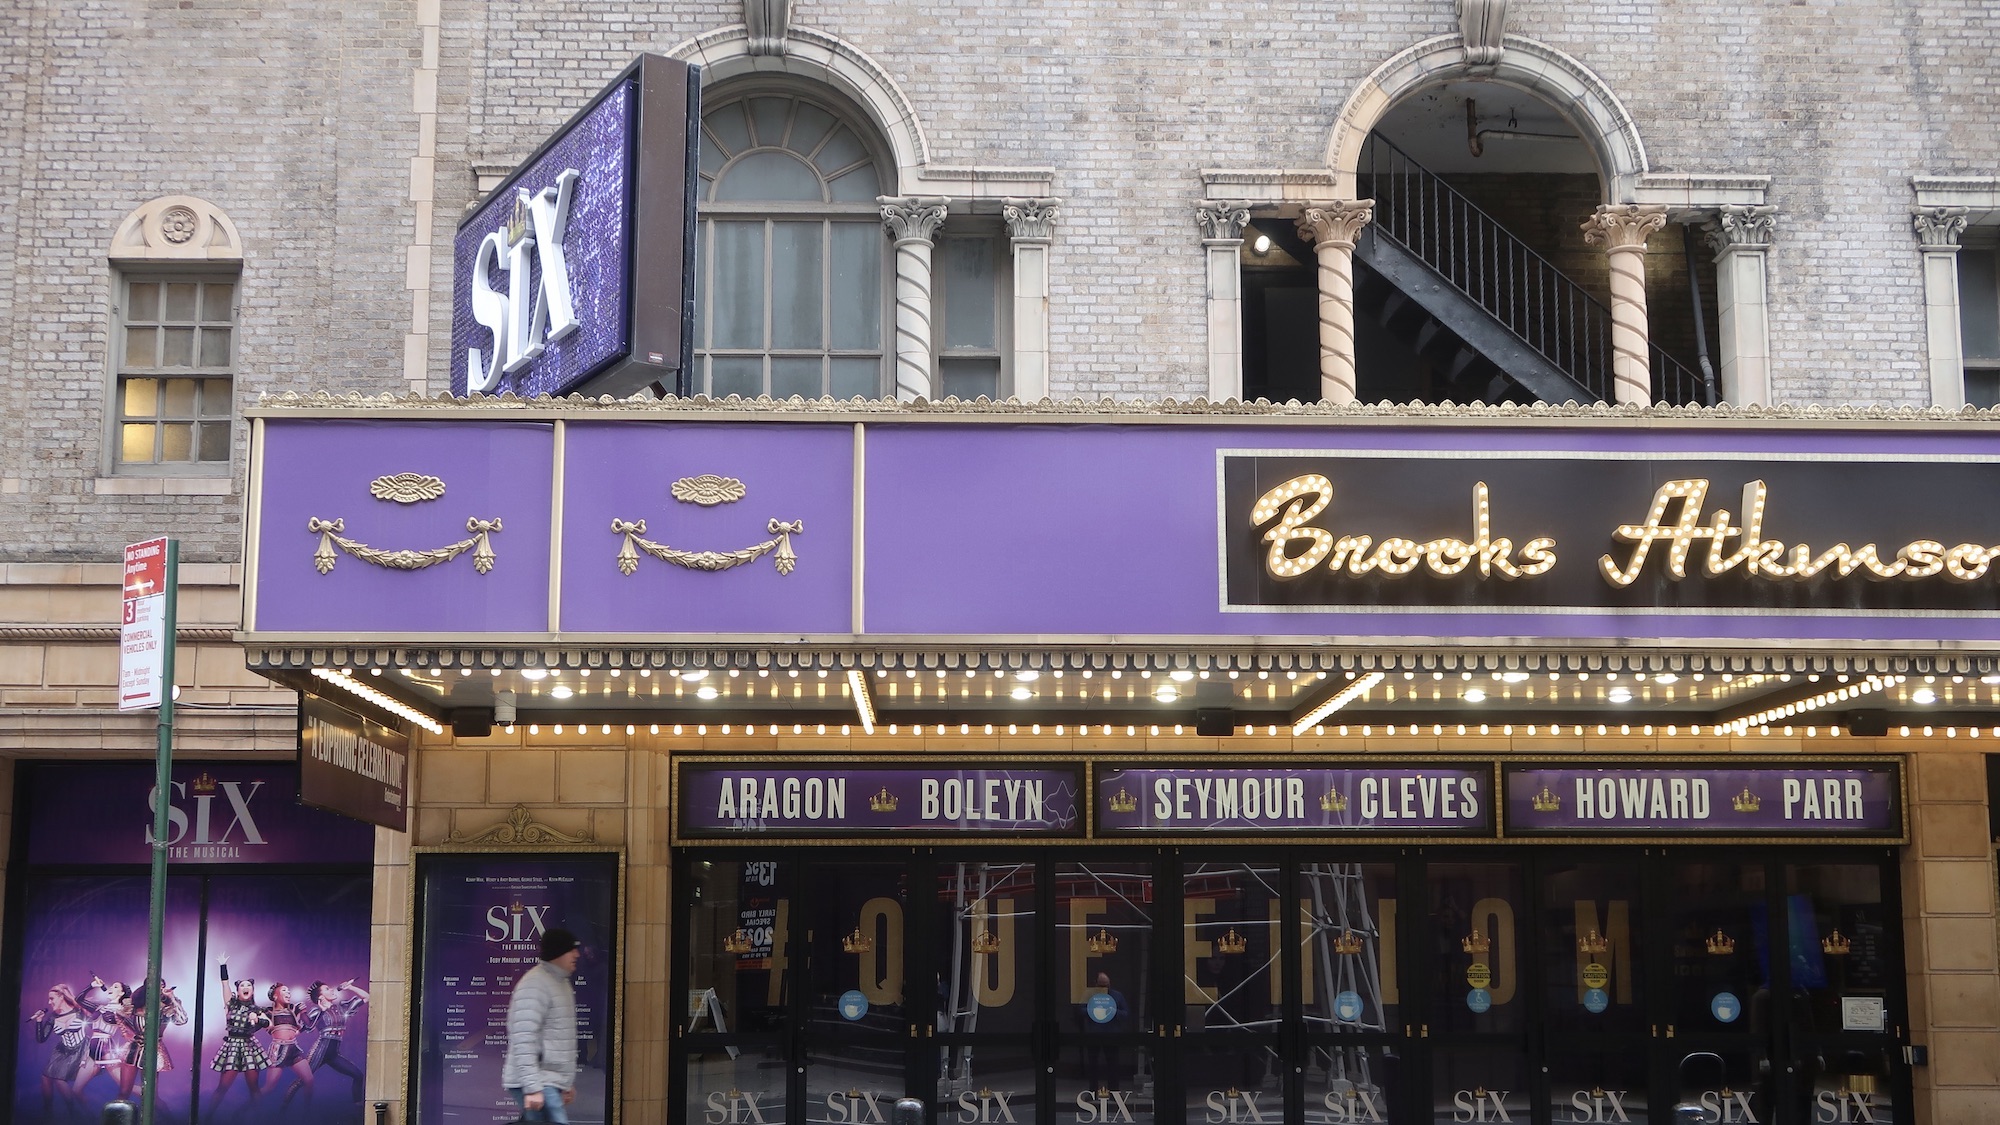 The exterior of the Brooks Atkinson theater featuring purple and gold posters advertising the musical.